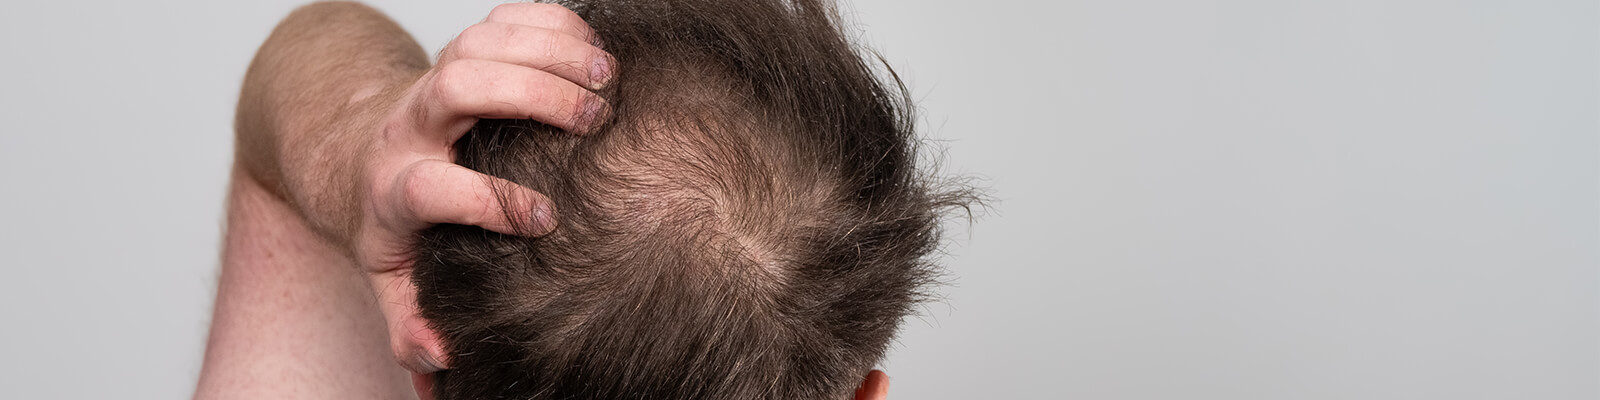 Finasteride vs Minoxidil: Which One Is Right For Your Hair Loss?